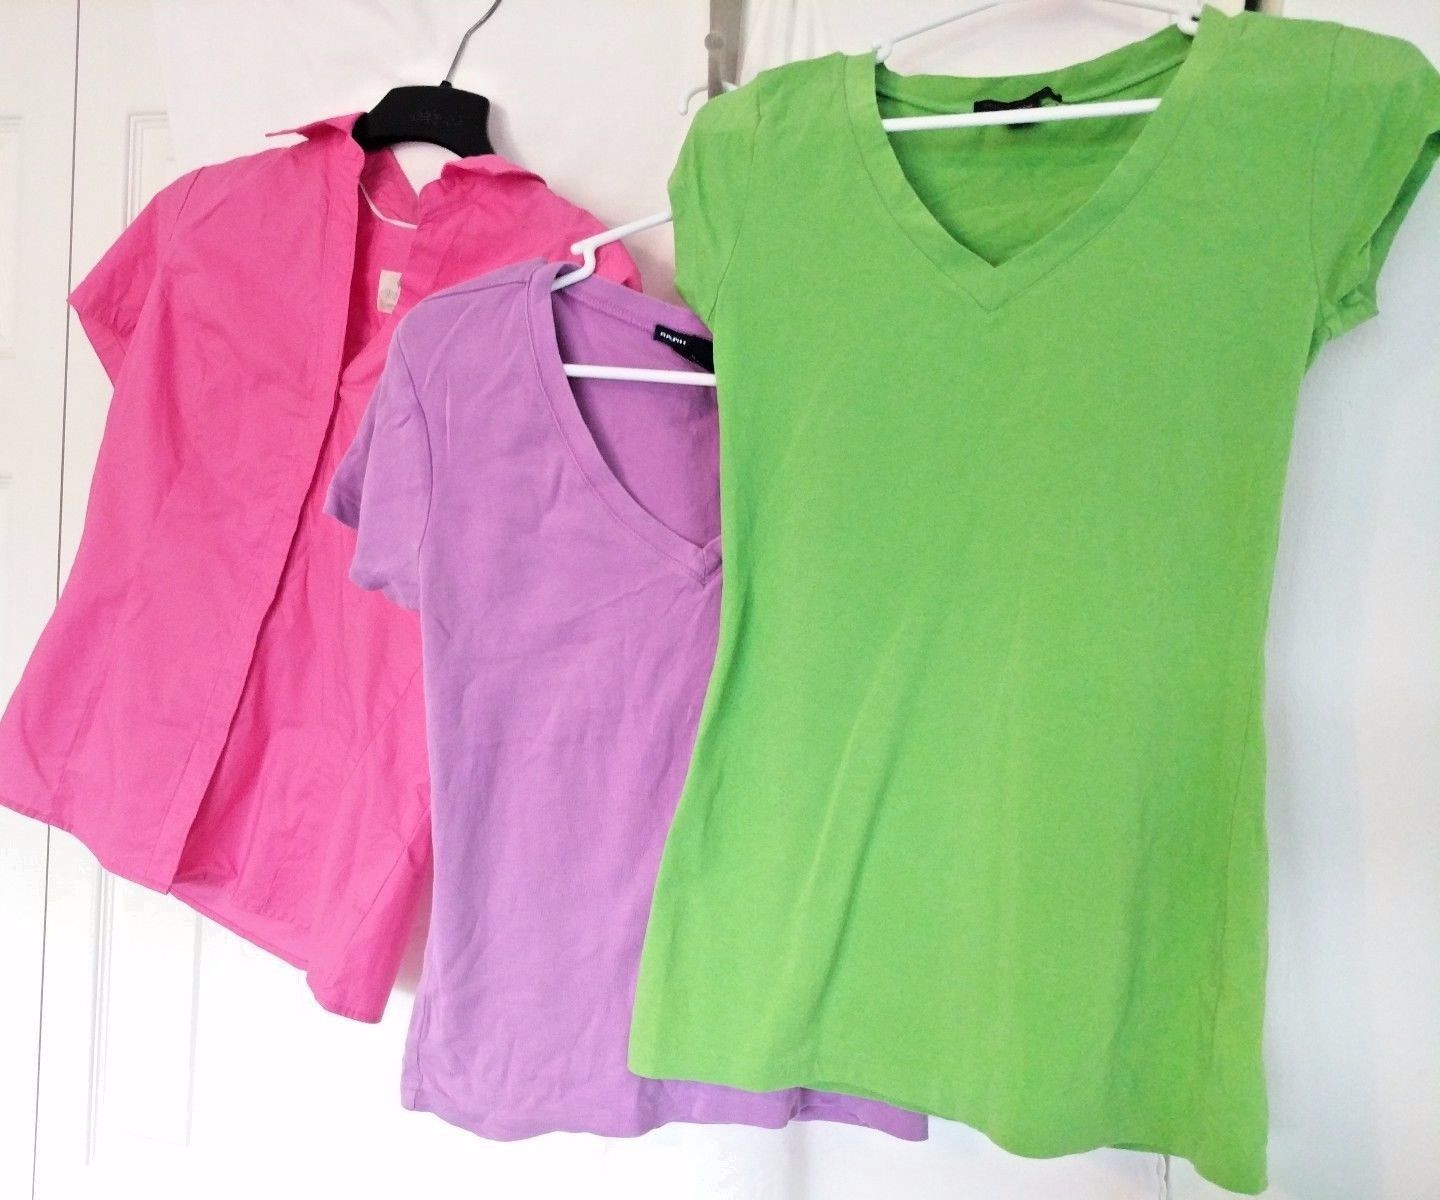 Primary image for Lot of Womens RALPH LAUREN SPORT RIDERS LEE ZANANA OUTFITTERS SHIRTS Tops SS